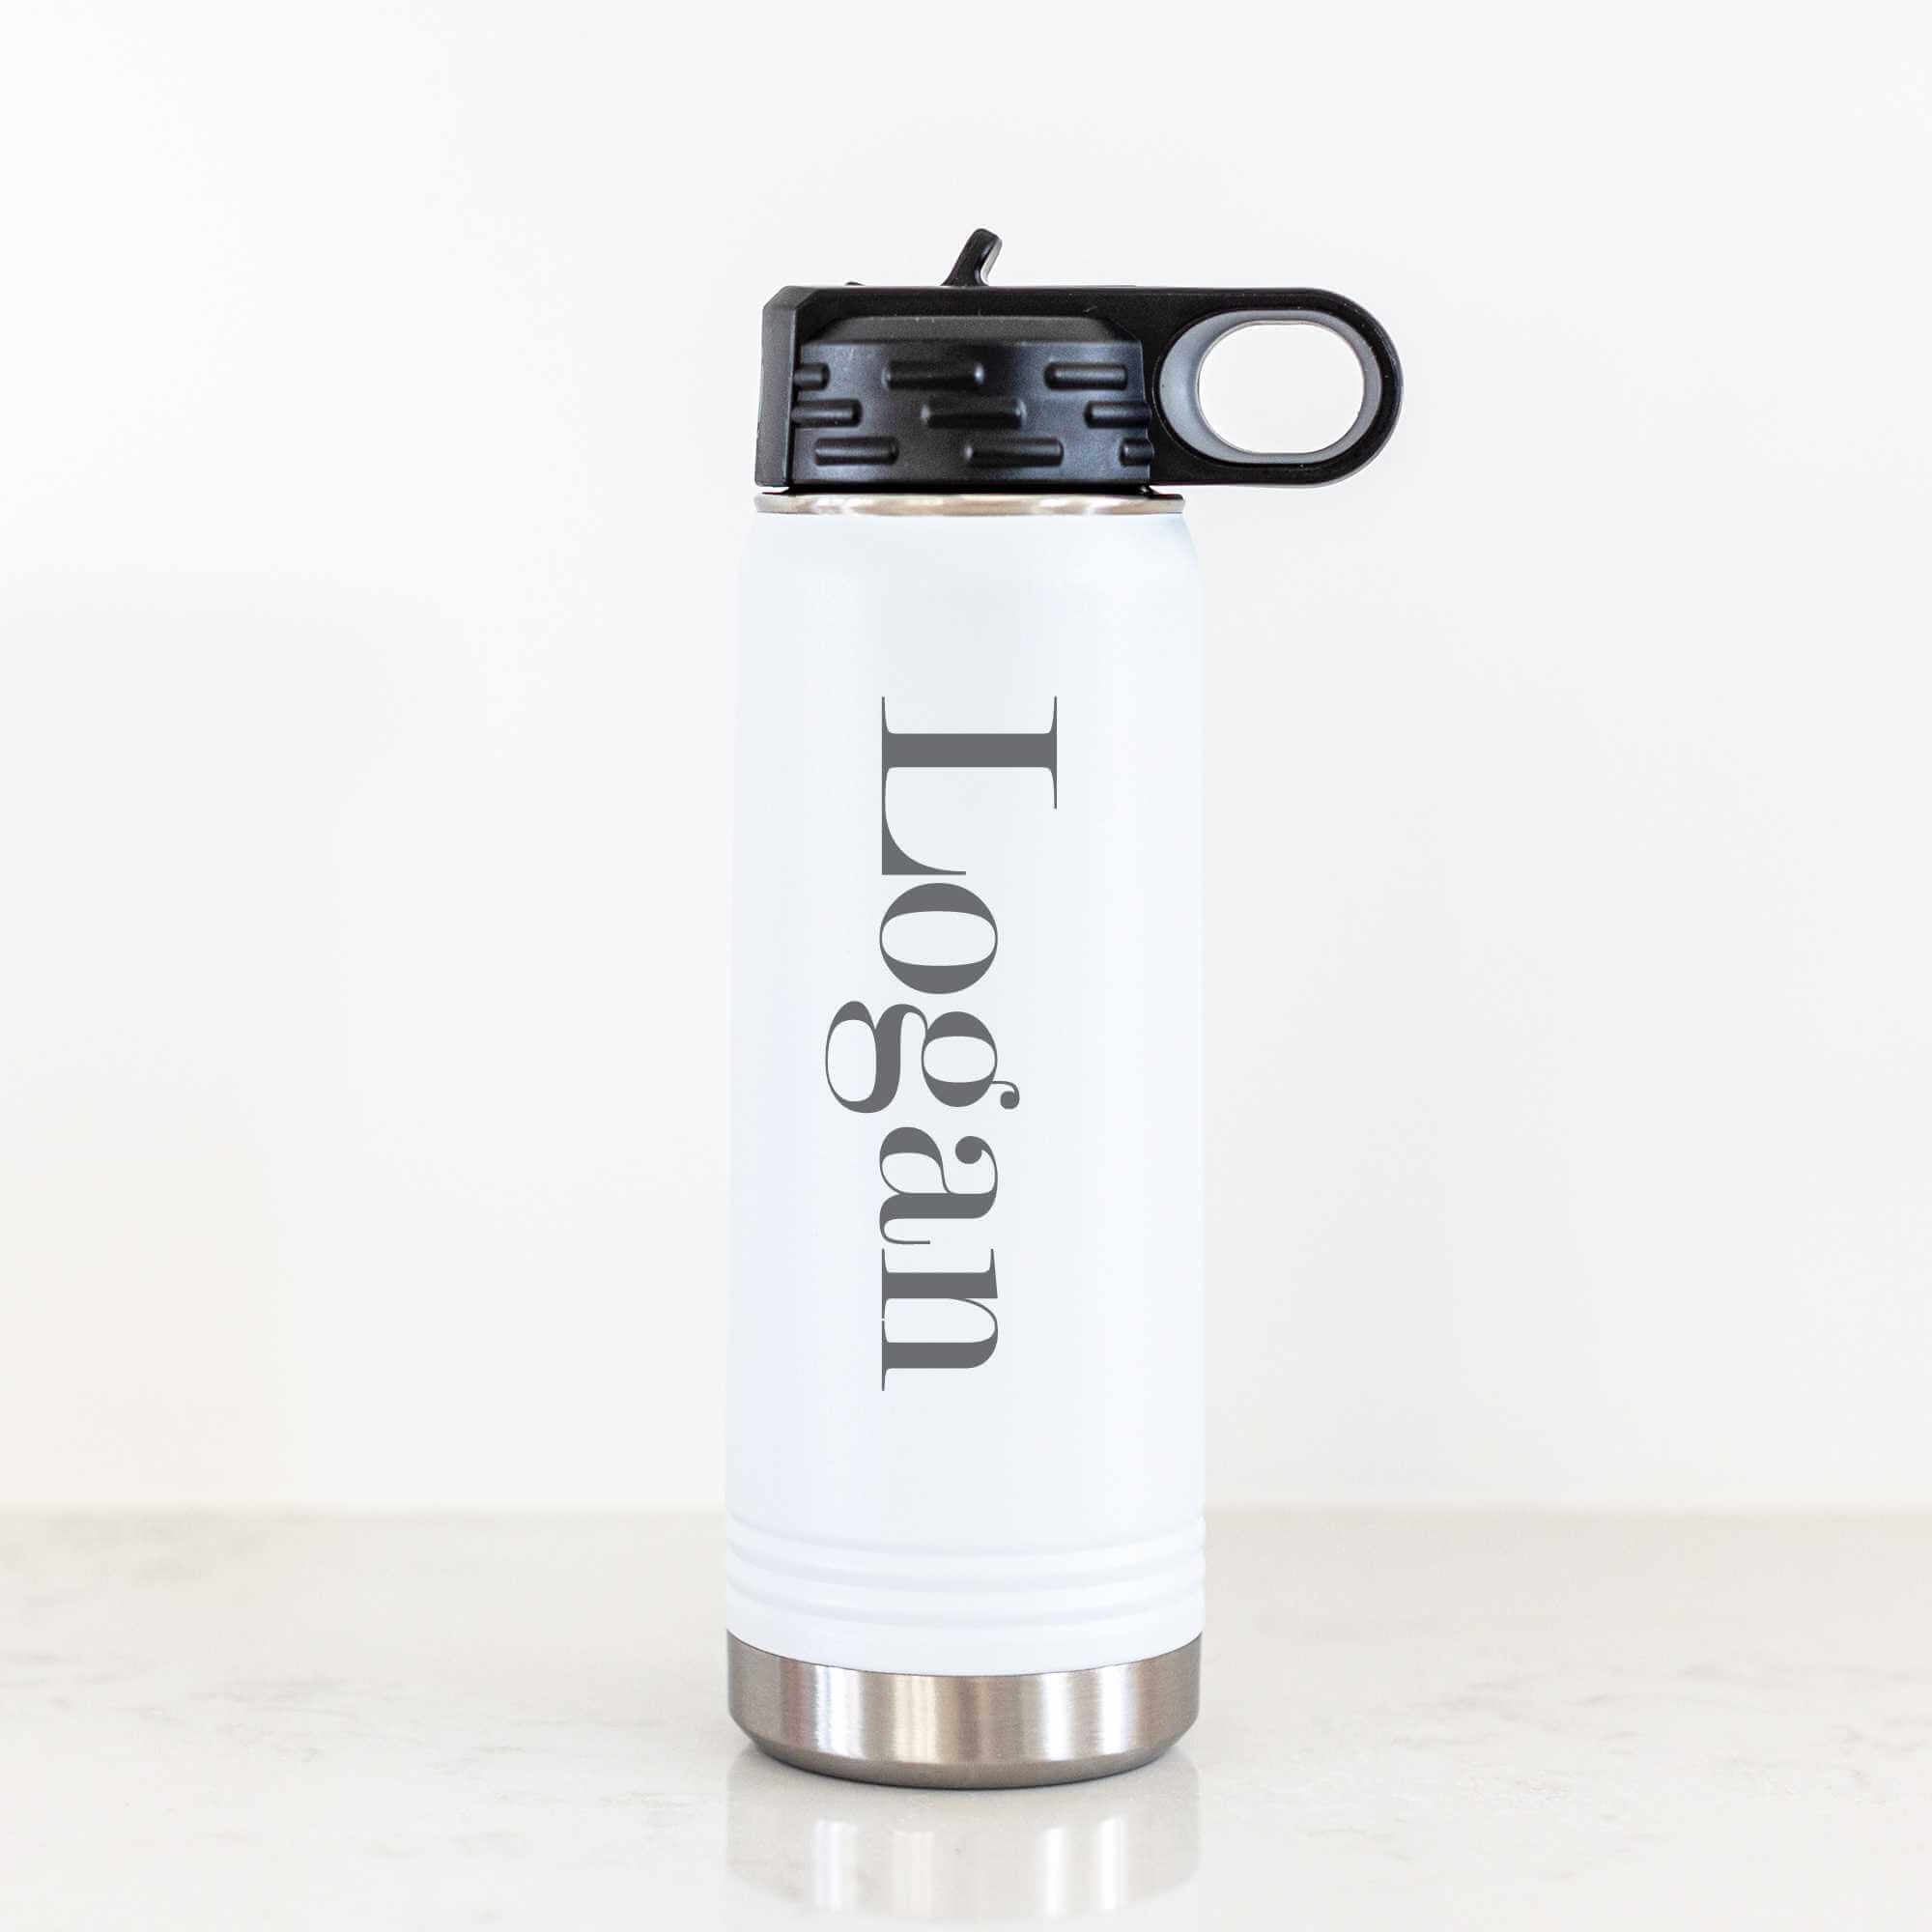 Personalized Steel Water Bottle with Name - 20 oz